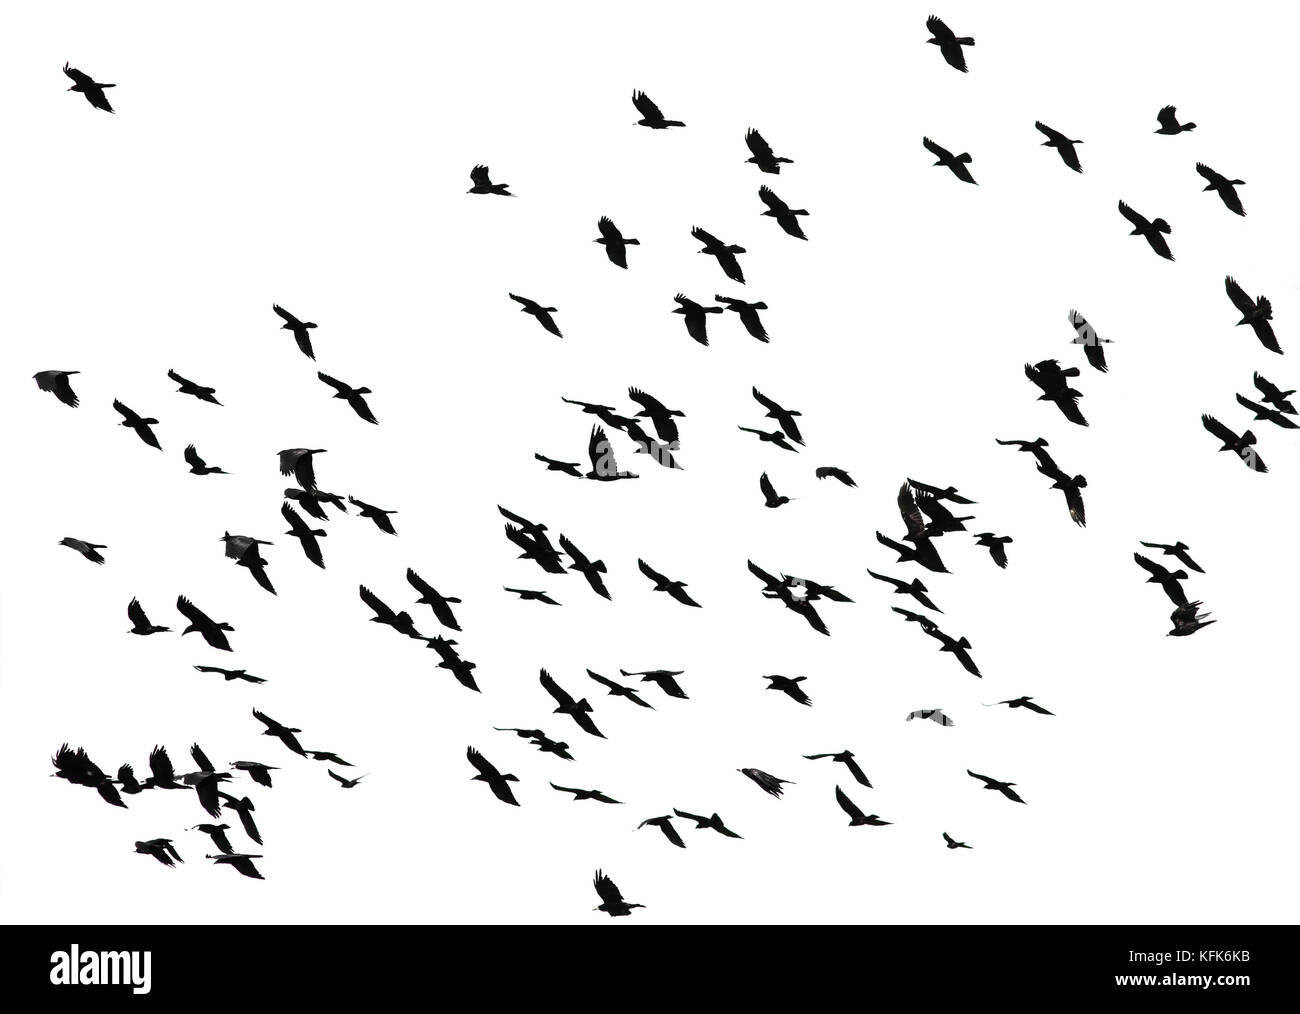 large flock of black birds crows flying on an isolated white background Stock Photo